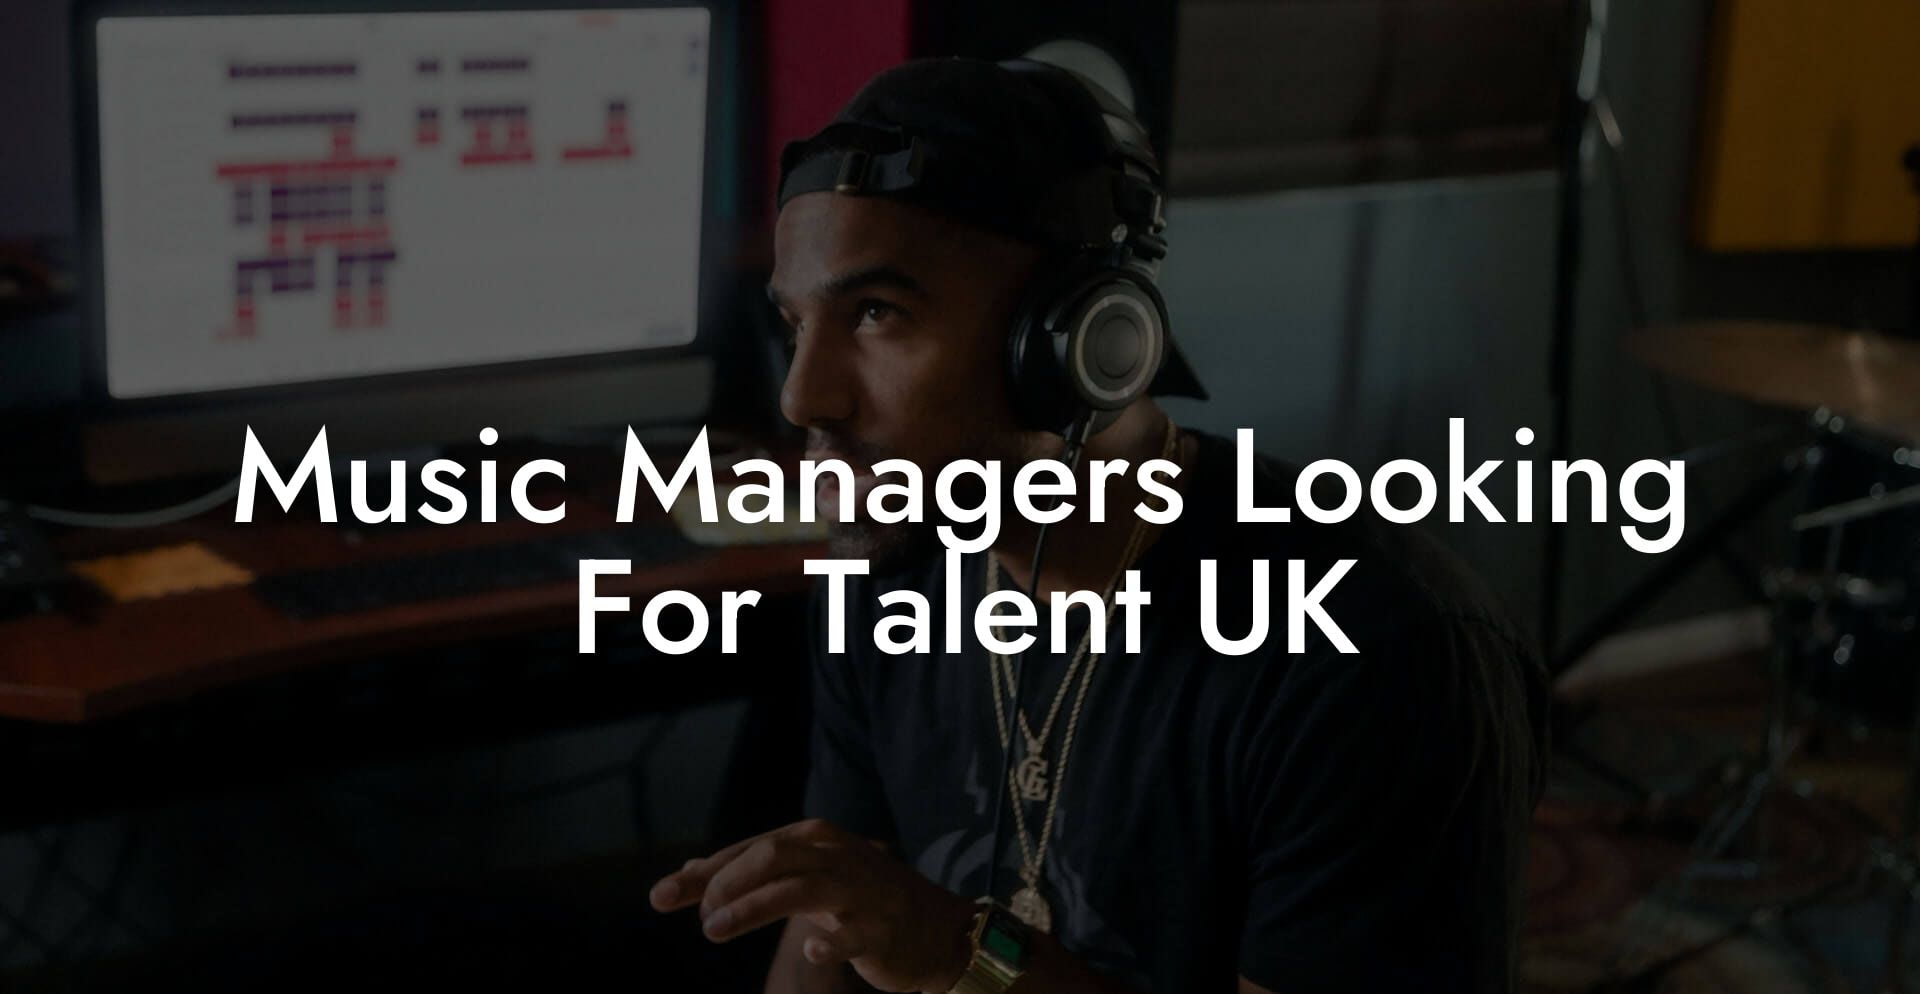 Music Managers Looking For Talent UK